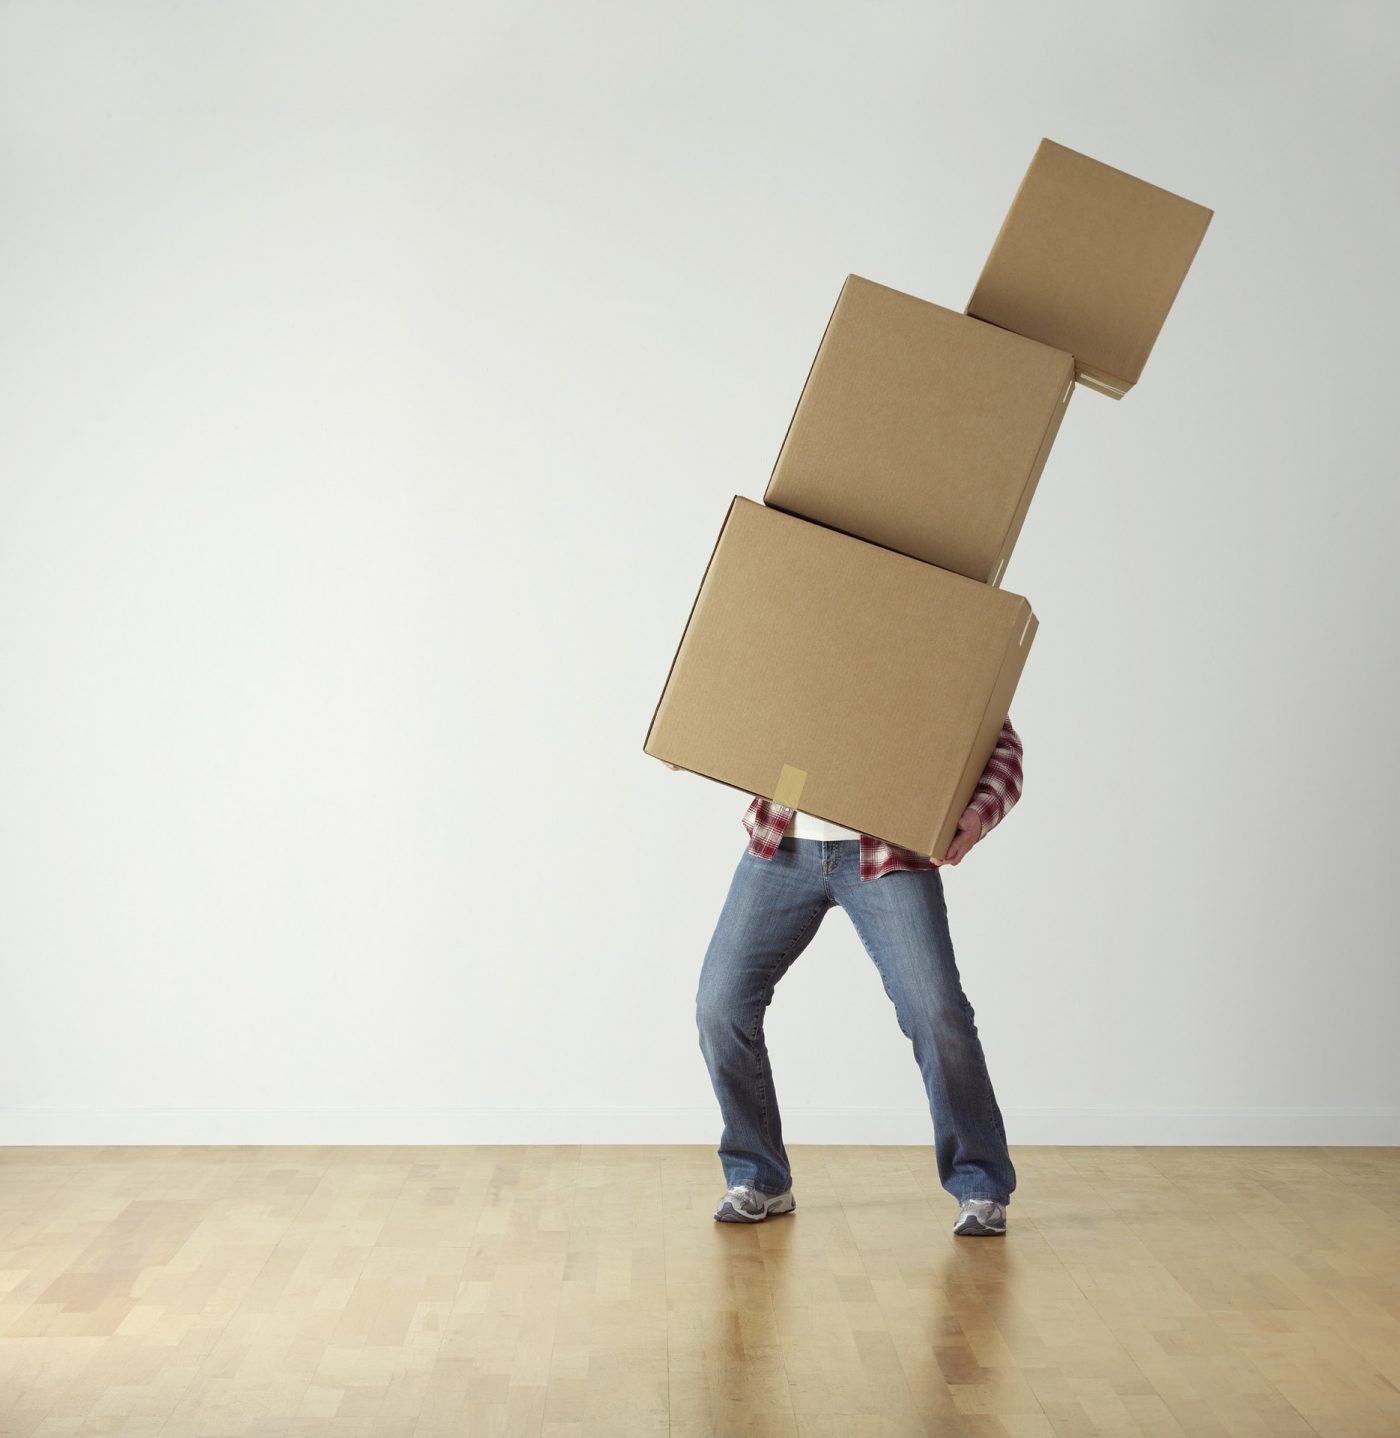 Man Carrying Three Boxes And Falling Over